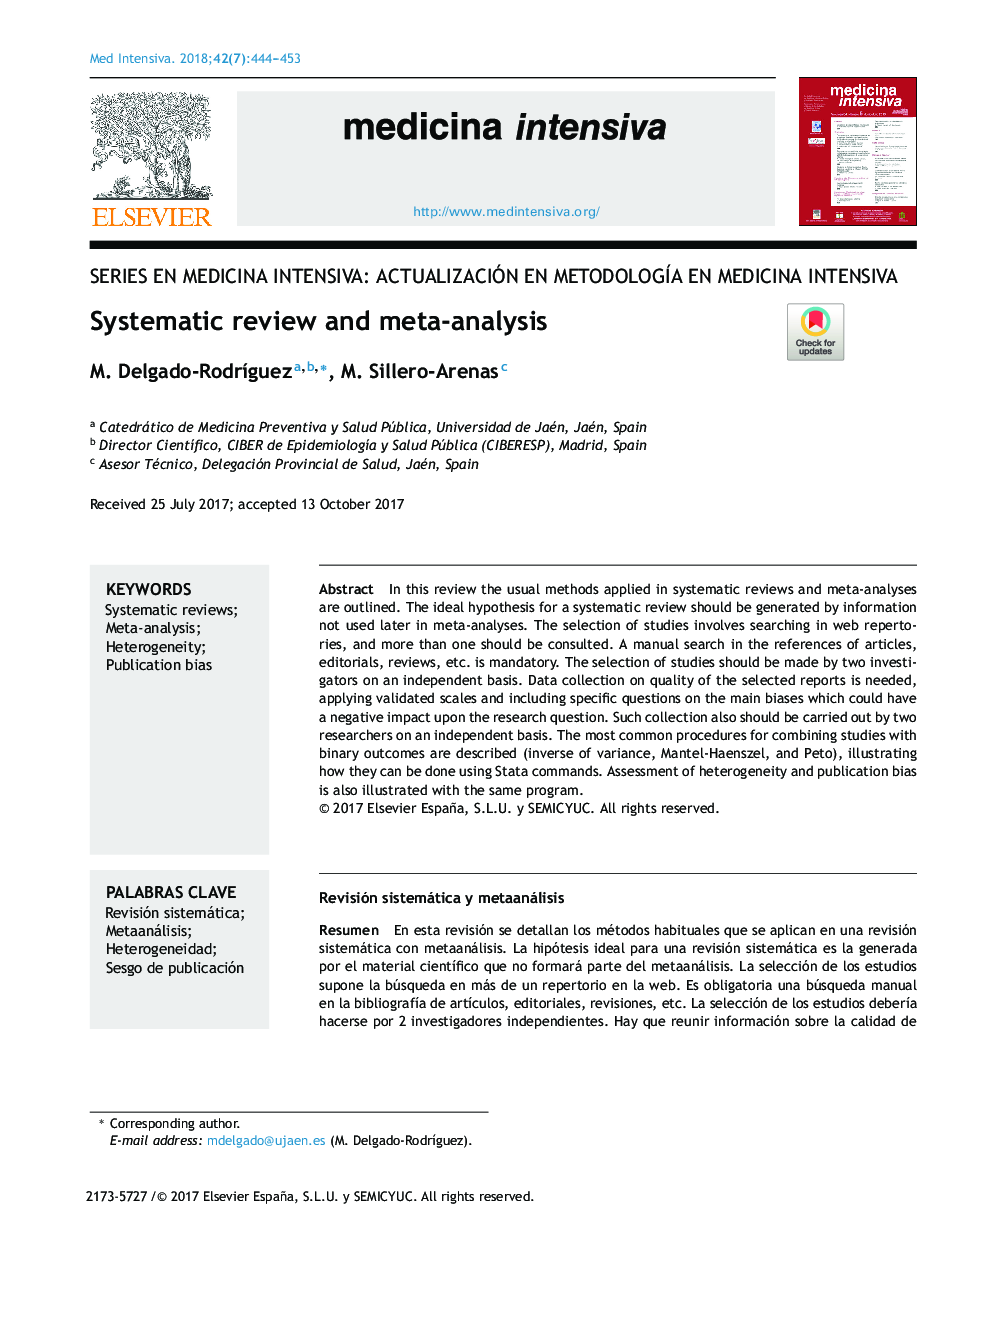 Systematic review and meta-analysis